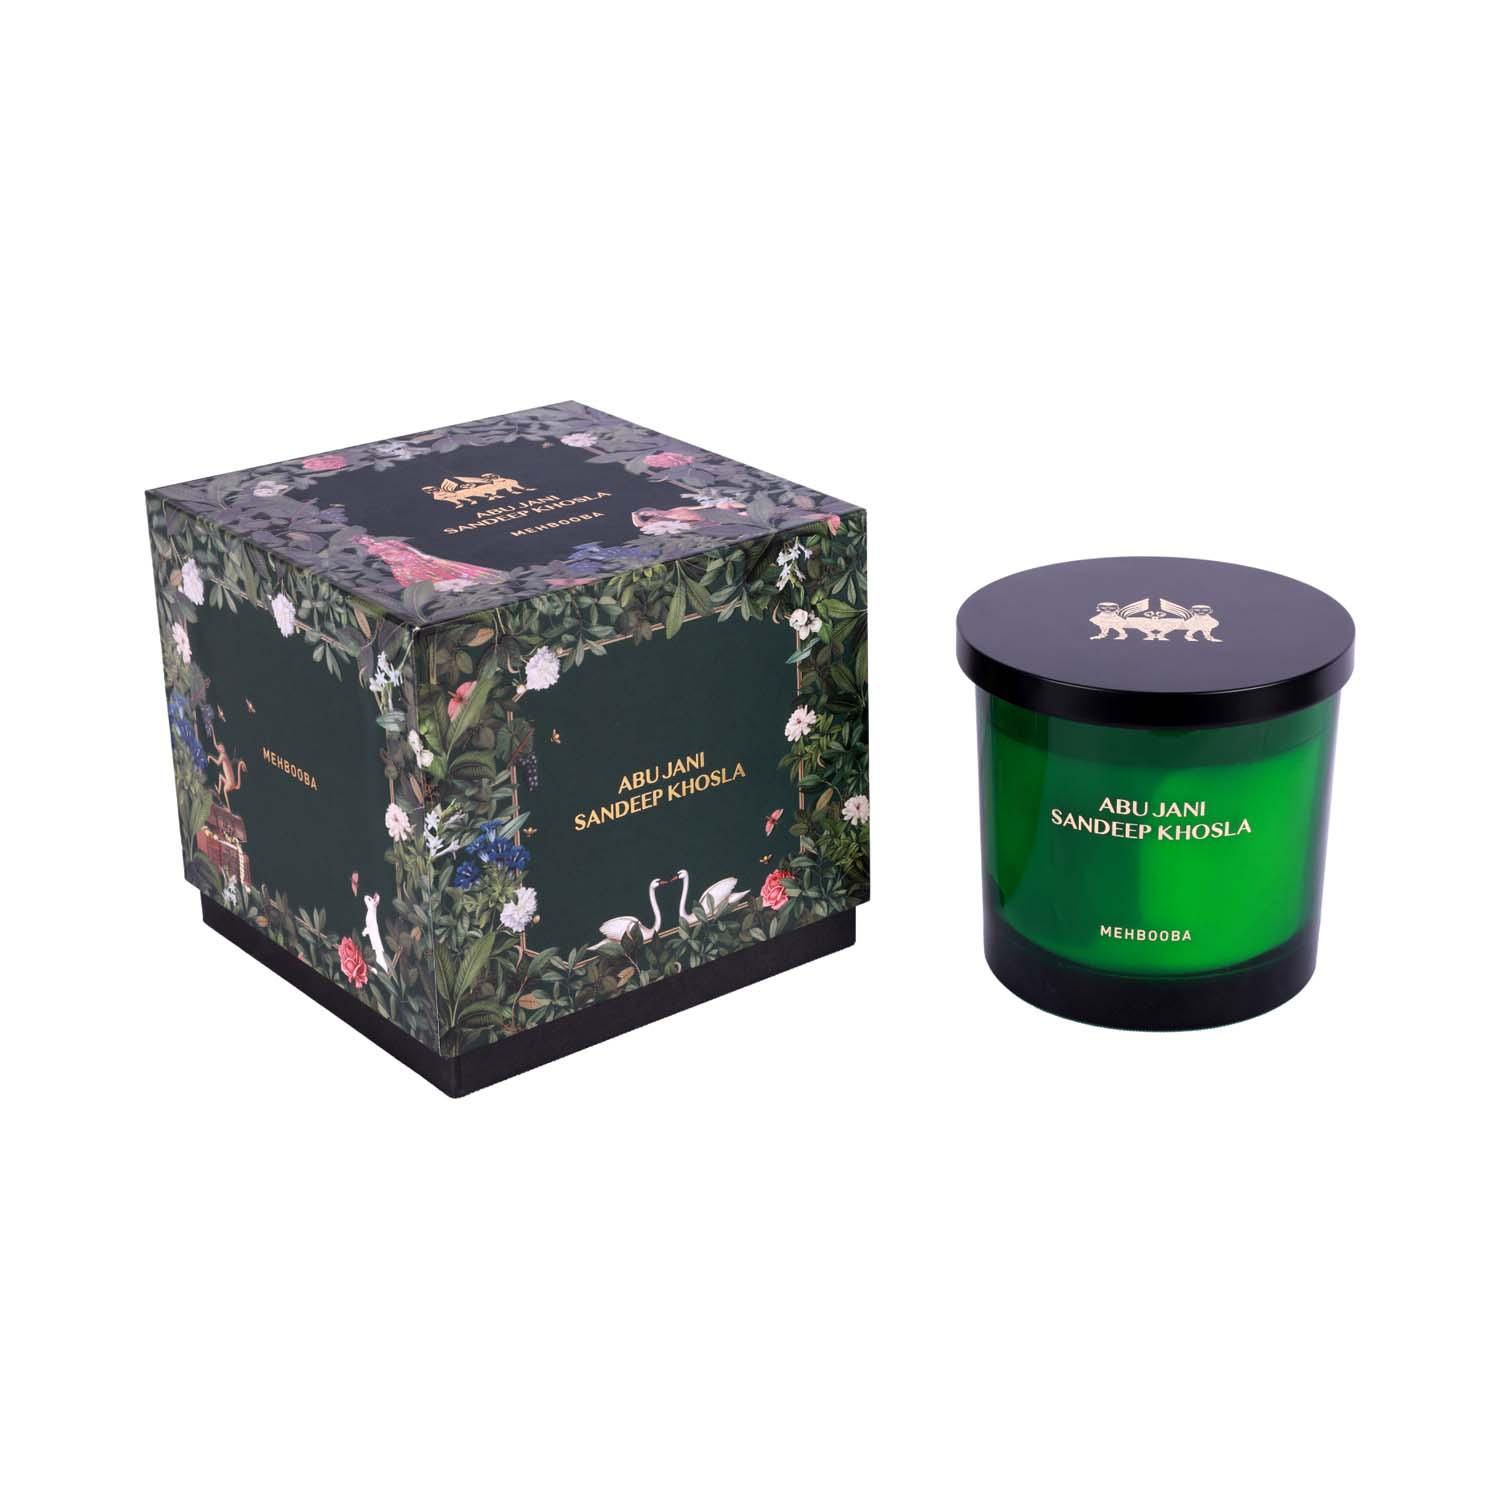 Abu Jani Sandeep Khosla | Abu Jani Sandeep Khosla - Mehbooba - Rose & Oud Candle (350g)